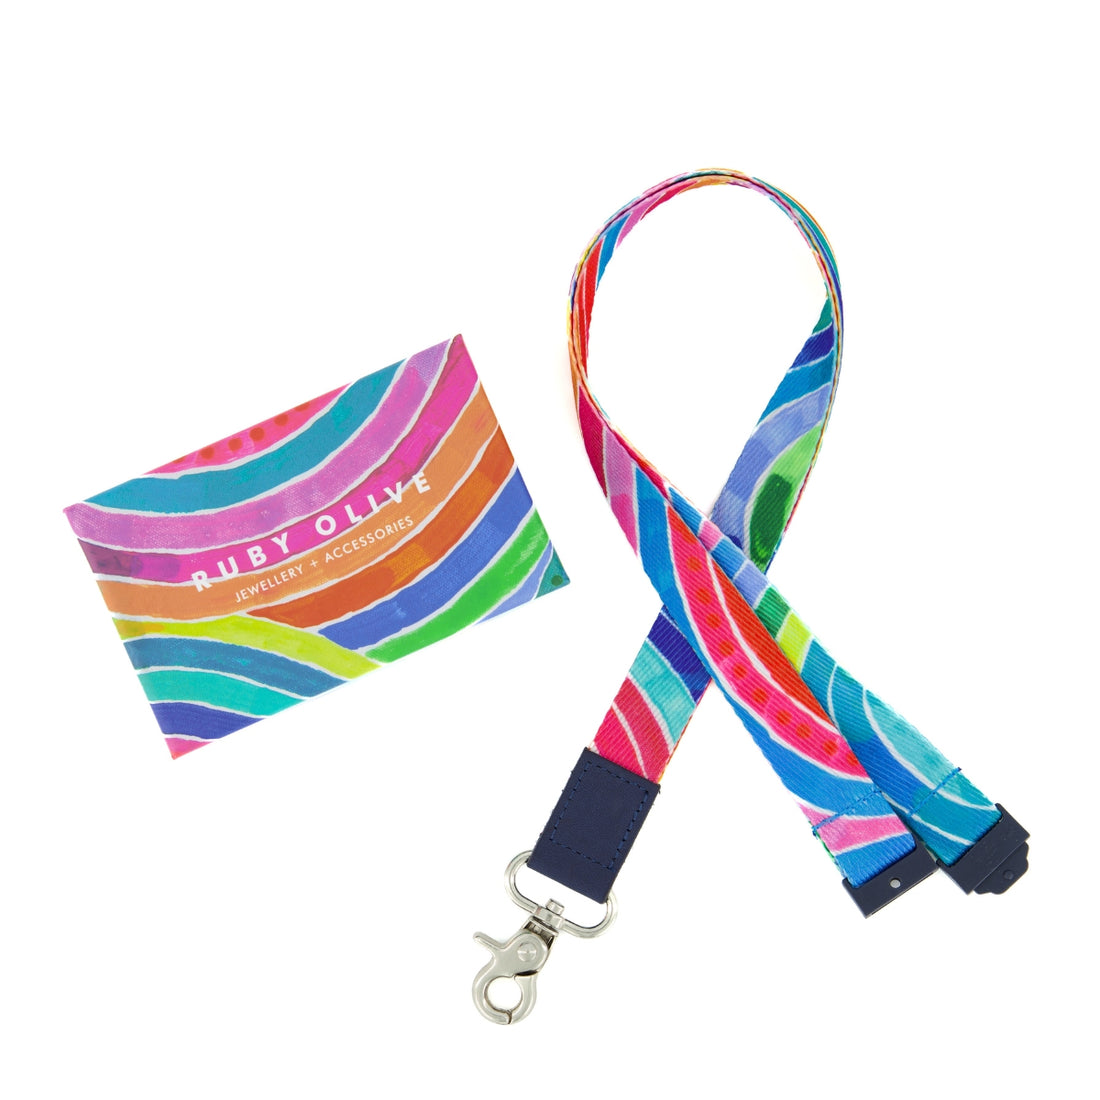 RO x Lordy Dordie Rainbow Lanyard (2 Colours With Safety Clasp Option)